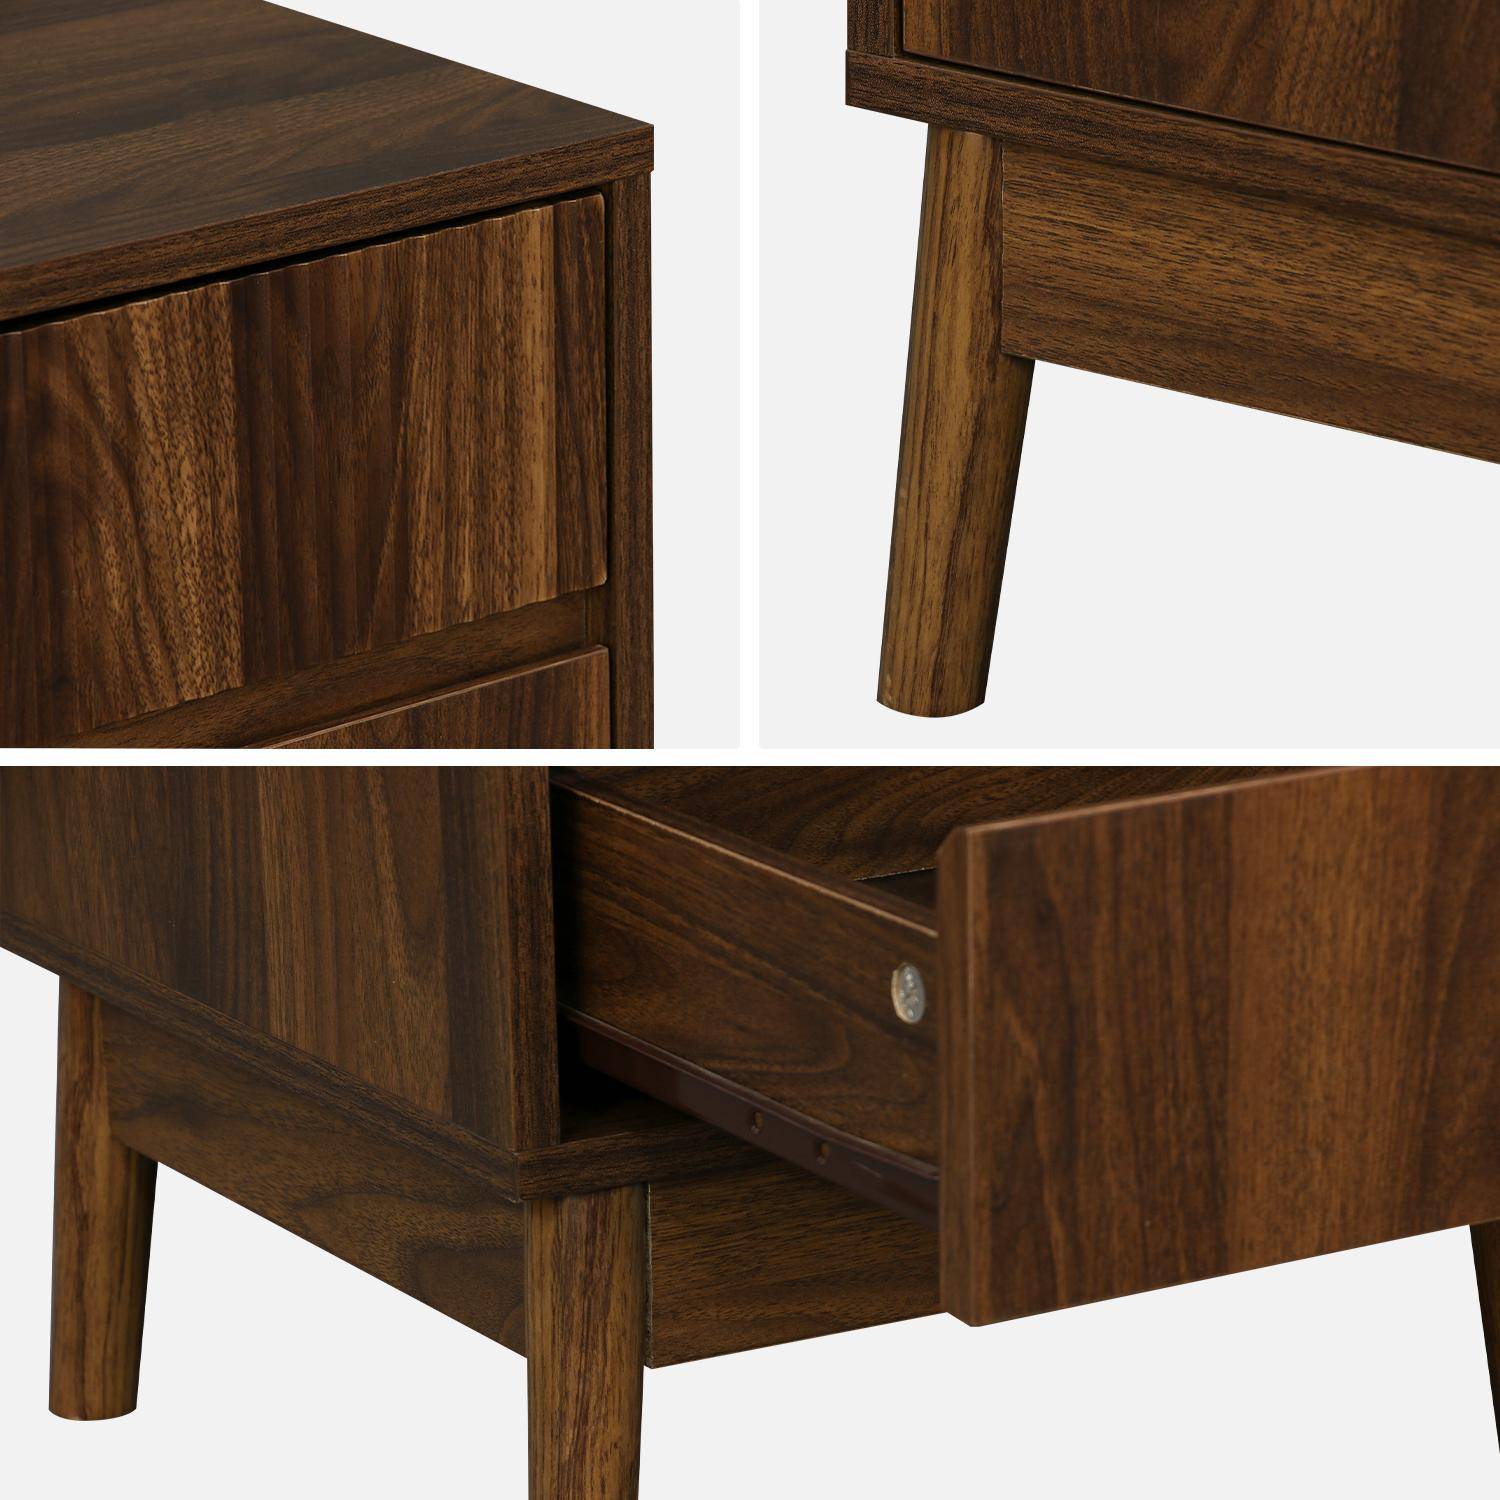 Pair of grooved wooden bedside tables with 2 drawers, 40x39x48cm - Linear - Dark Wood colour,sweeek,Photo7